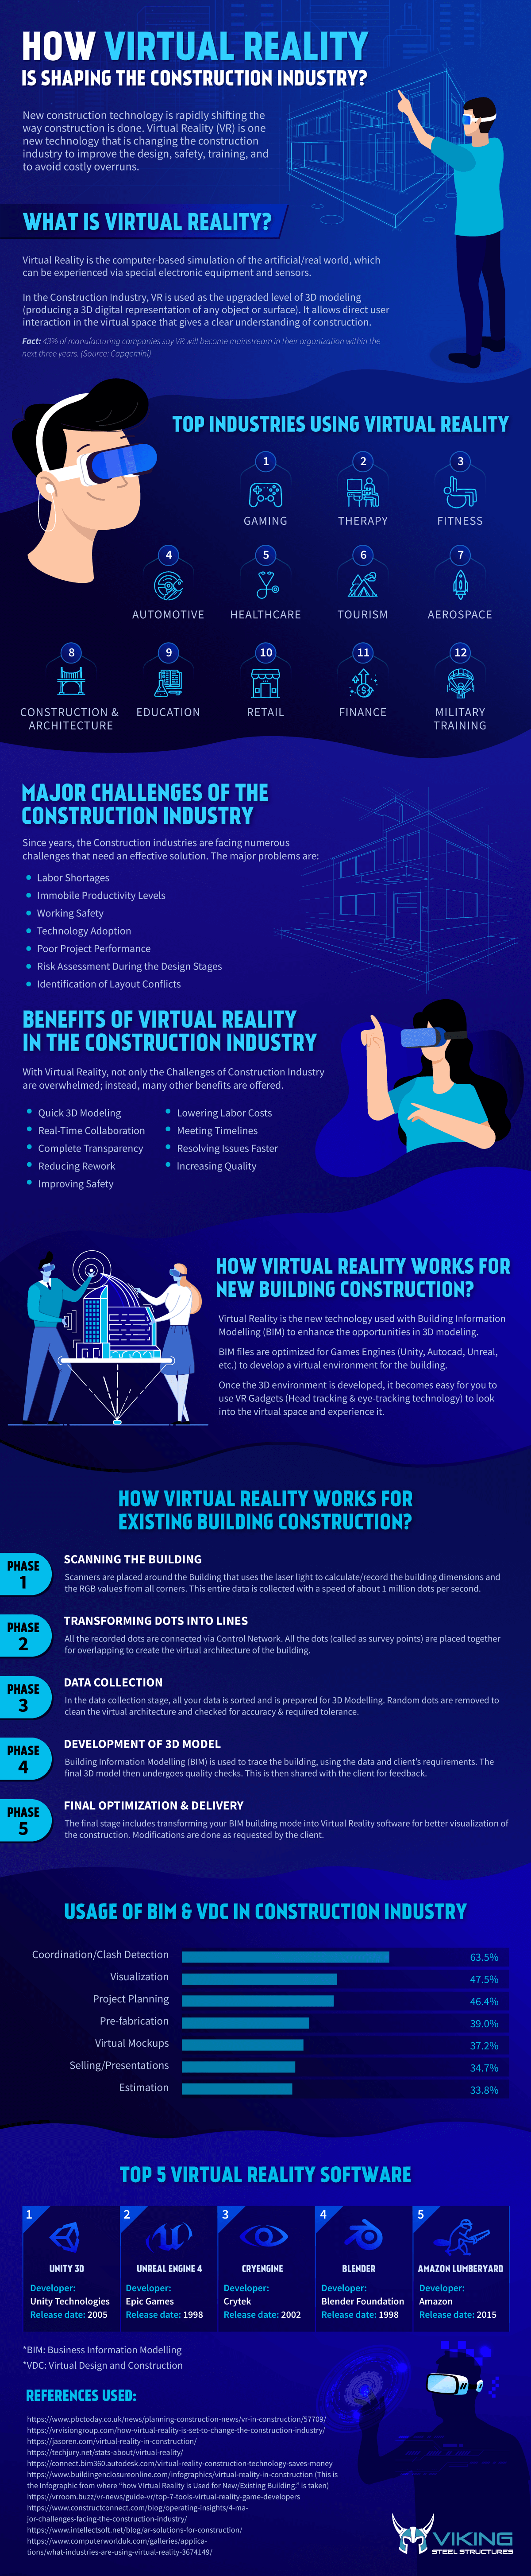 How is Virtual Reality Shaping the Construction Industry